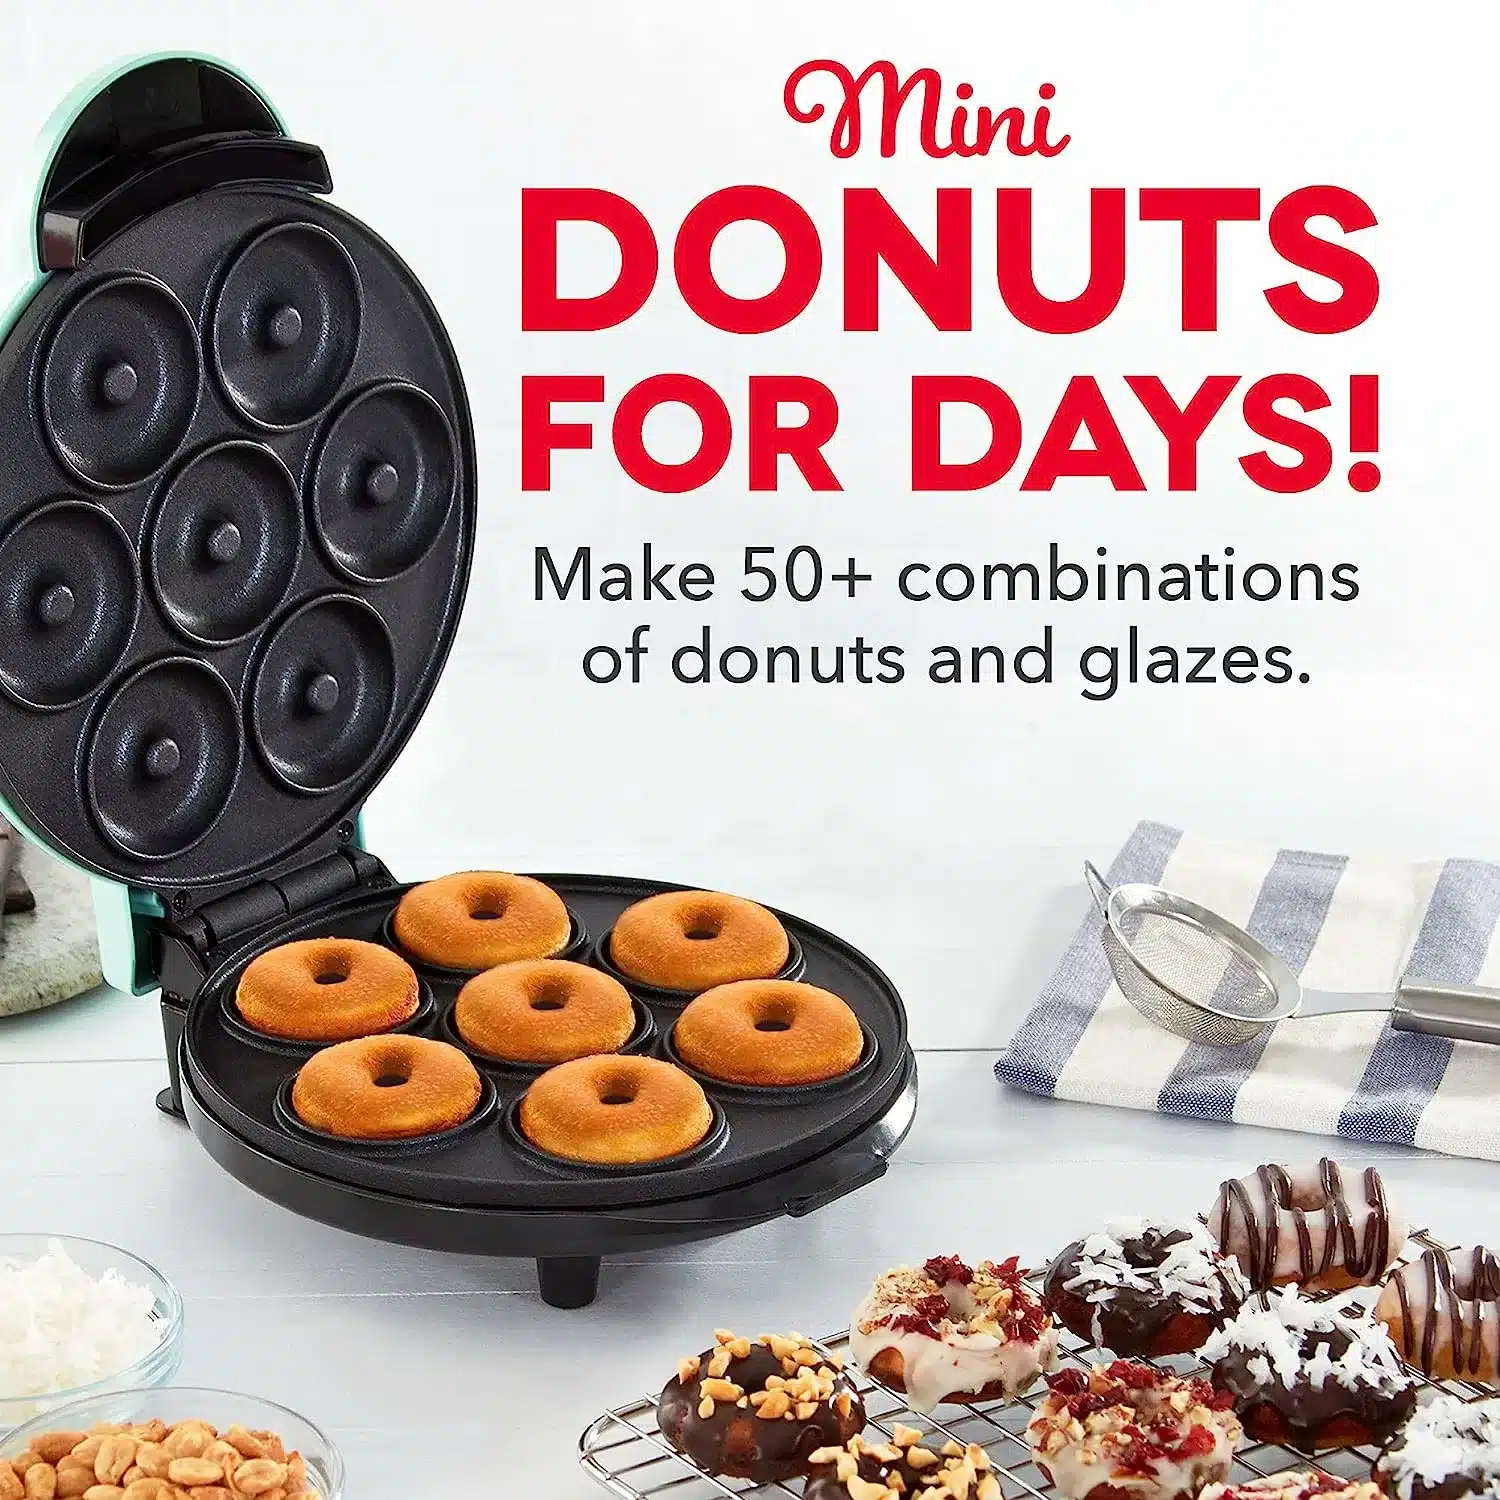 A black mini donut maker filled with cooked donuts. A tray of decorated donuts sits on a rack ready to eat.